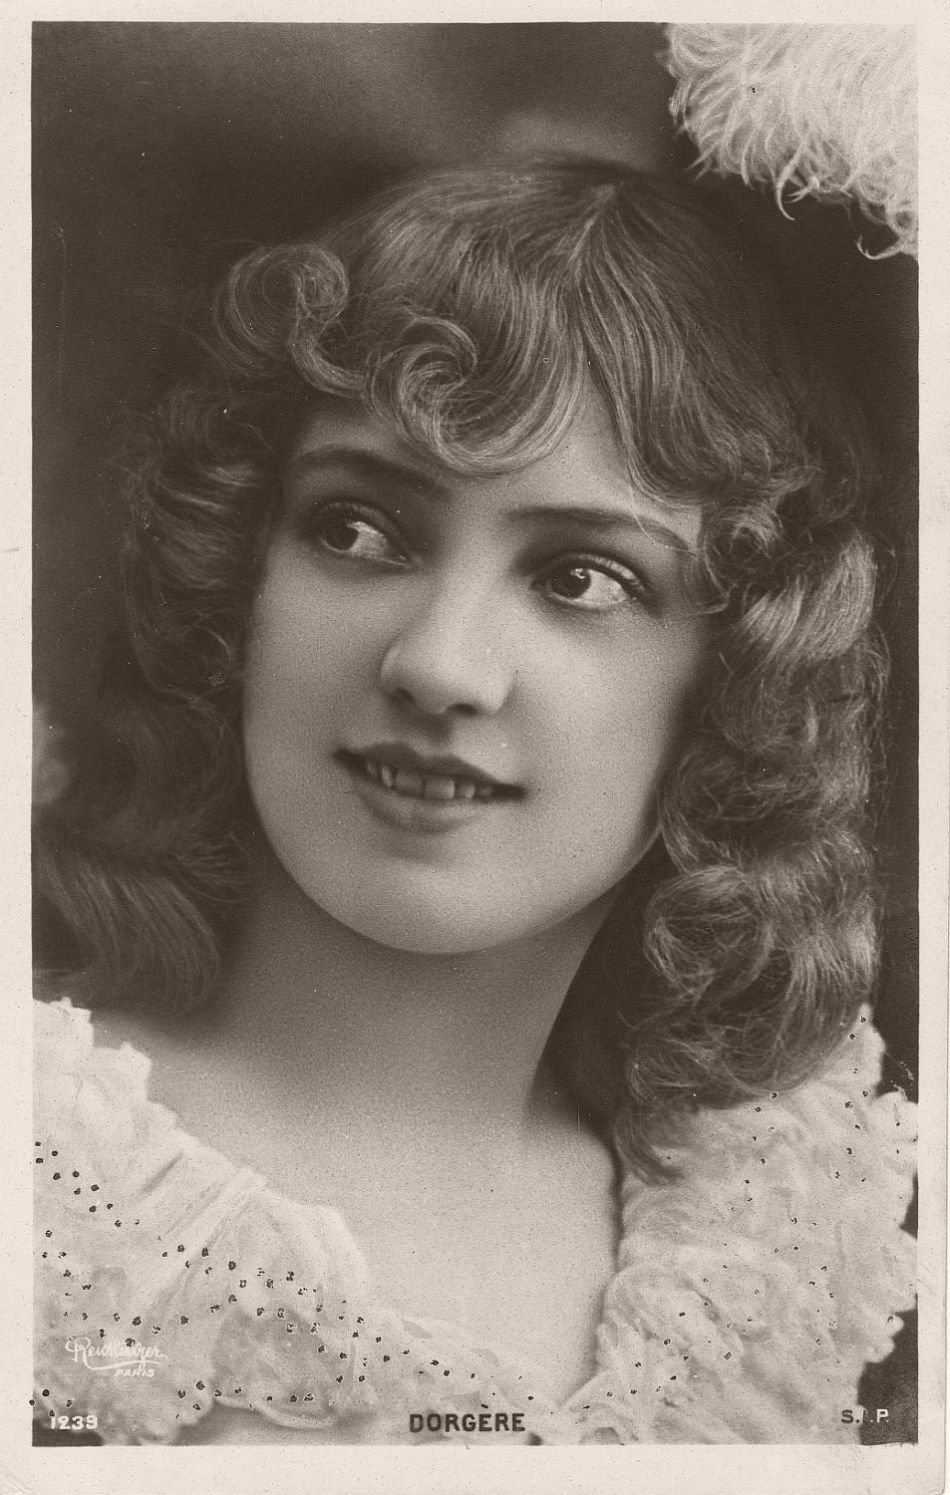 Arlette Dorgère (born Anna Mathilde Irma Jouve; 1880 – 1965) was a French actress, dancer and singer. She was represented on a large number of postcards of the Belle Époque and also a model for posters.